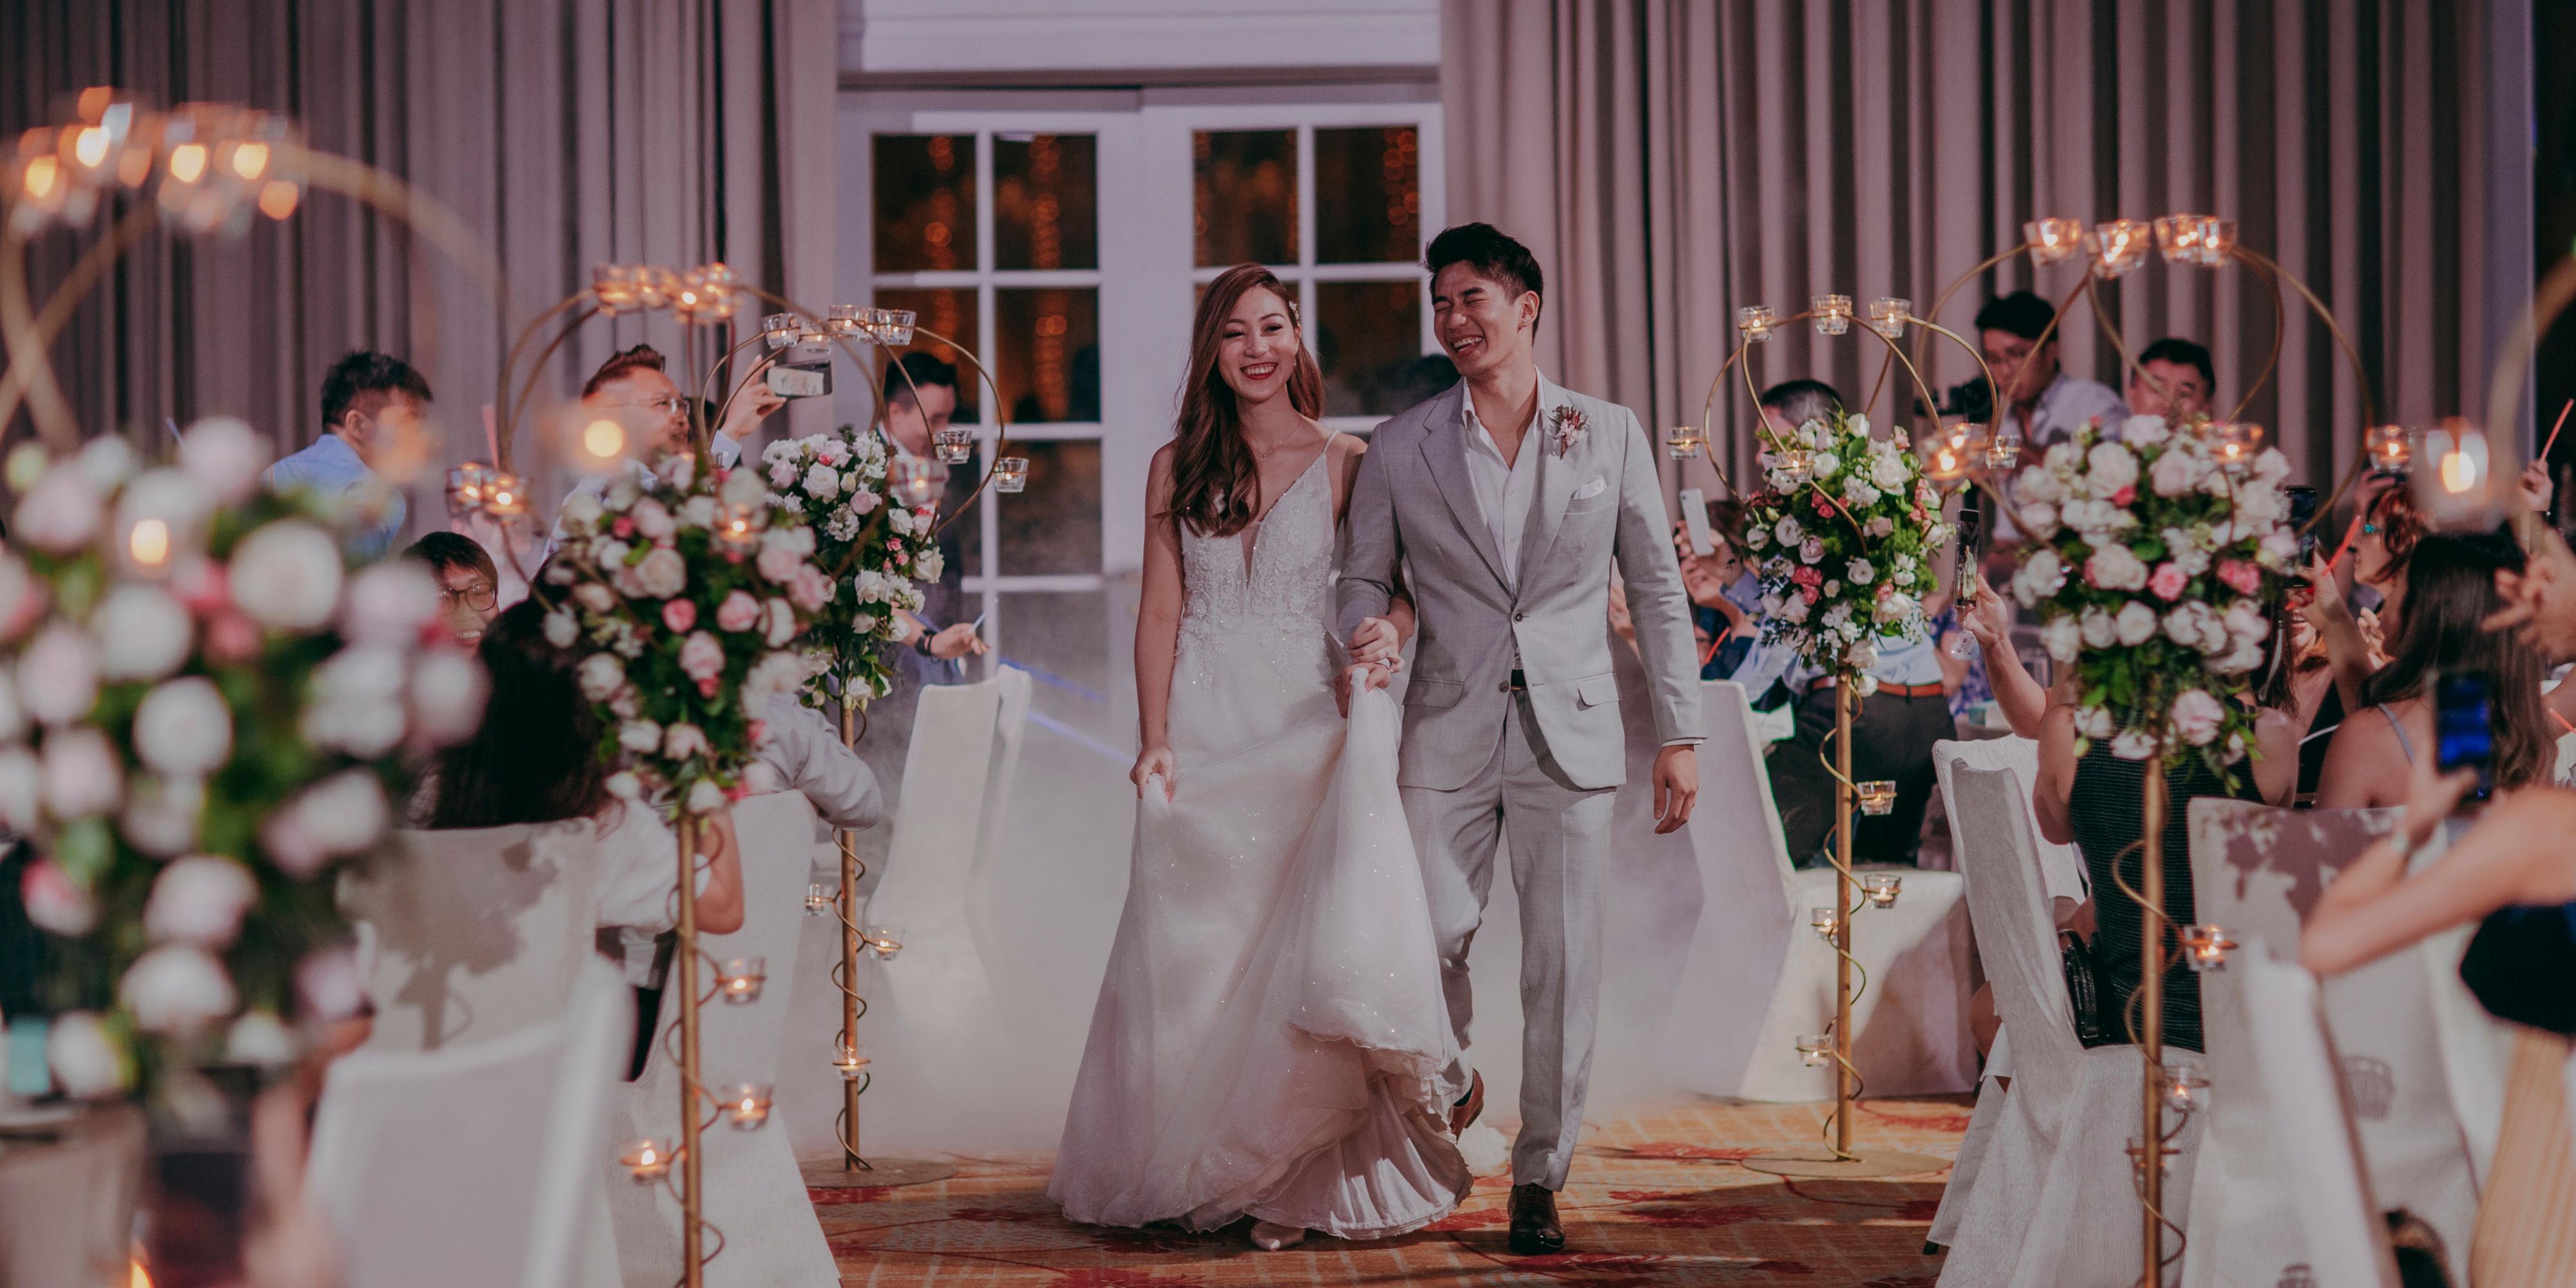 At InterContinental® Singapore, we believe that no two weddings are the same. Be it a lavish affair with hundreds of guests in the Grand Ballroom, or a private moment shared only with the nearest and dearest, our experienced wedding team is on hand to ensure that you and your guests will be treated to a celebration like none other.